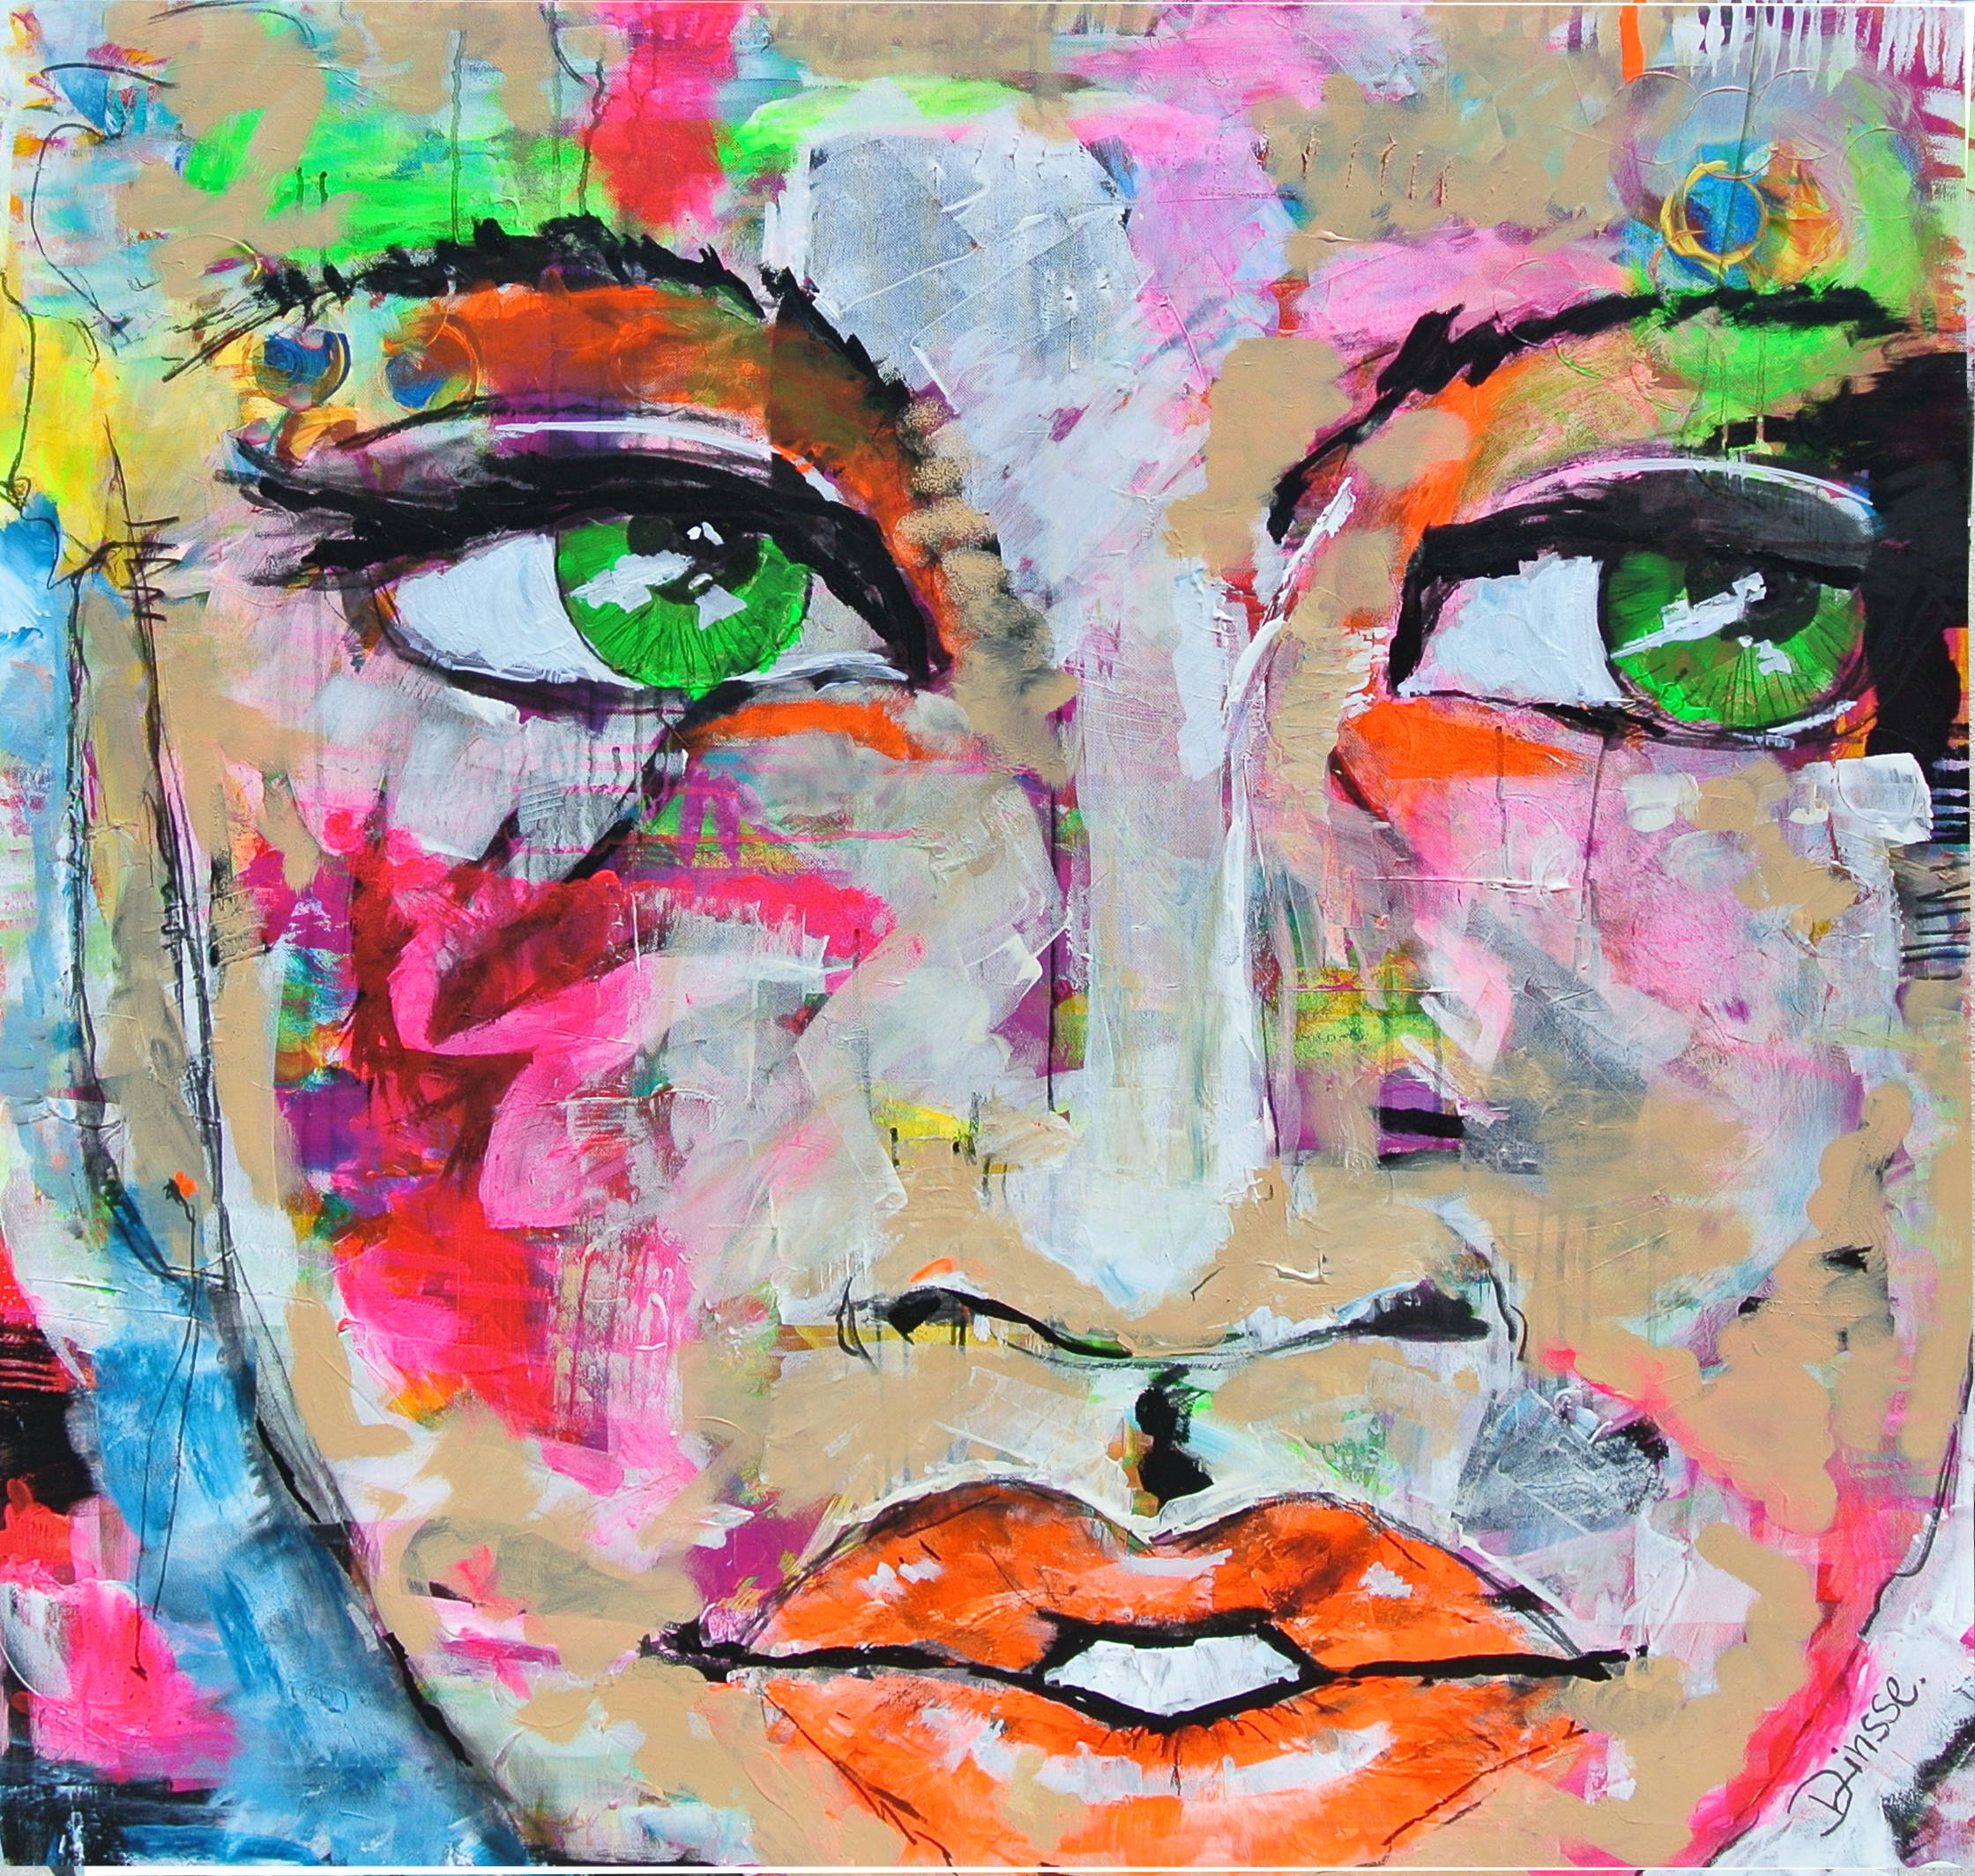 innere Einstellung, attitude, positive energy, acrylic painting, acrylic on canvas, portrait, neon pink, expressive eyes, neon orange, neon green, canvas, woman's face, green eyed lady, diana linsse, modern art, modern expressionism